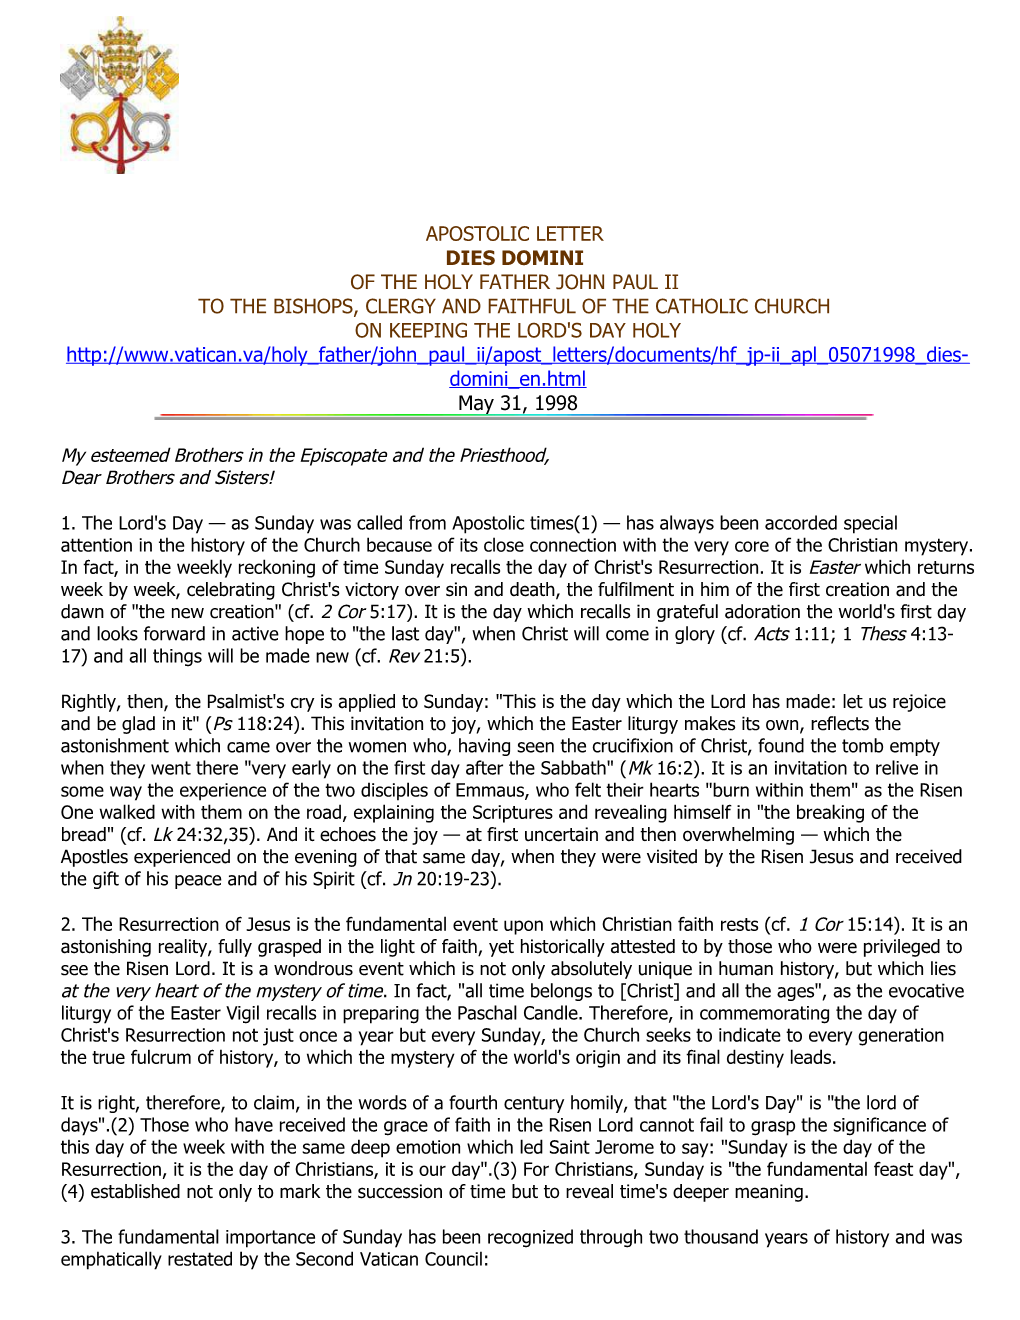 Apostolic Letter Dies Domini of the Holy Father John Paul Ii to the Bishops, Clergy And